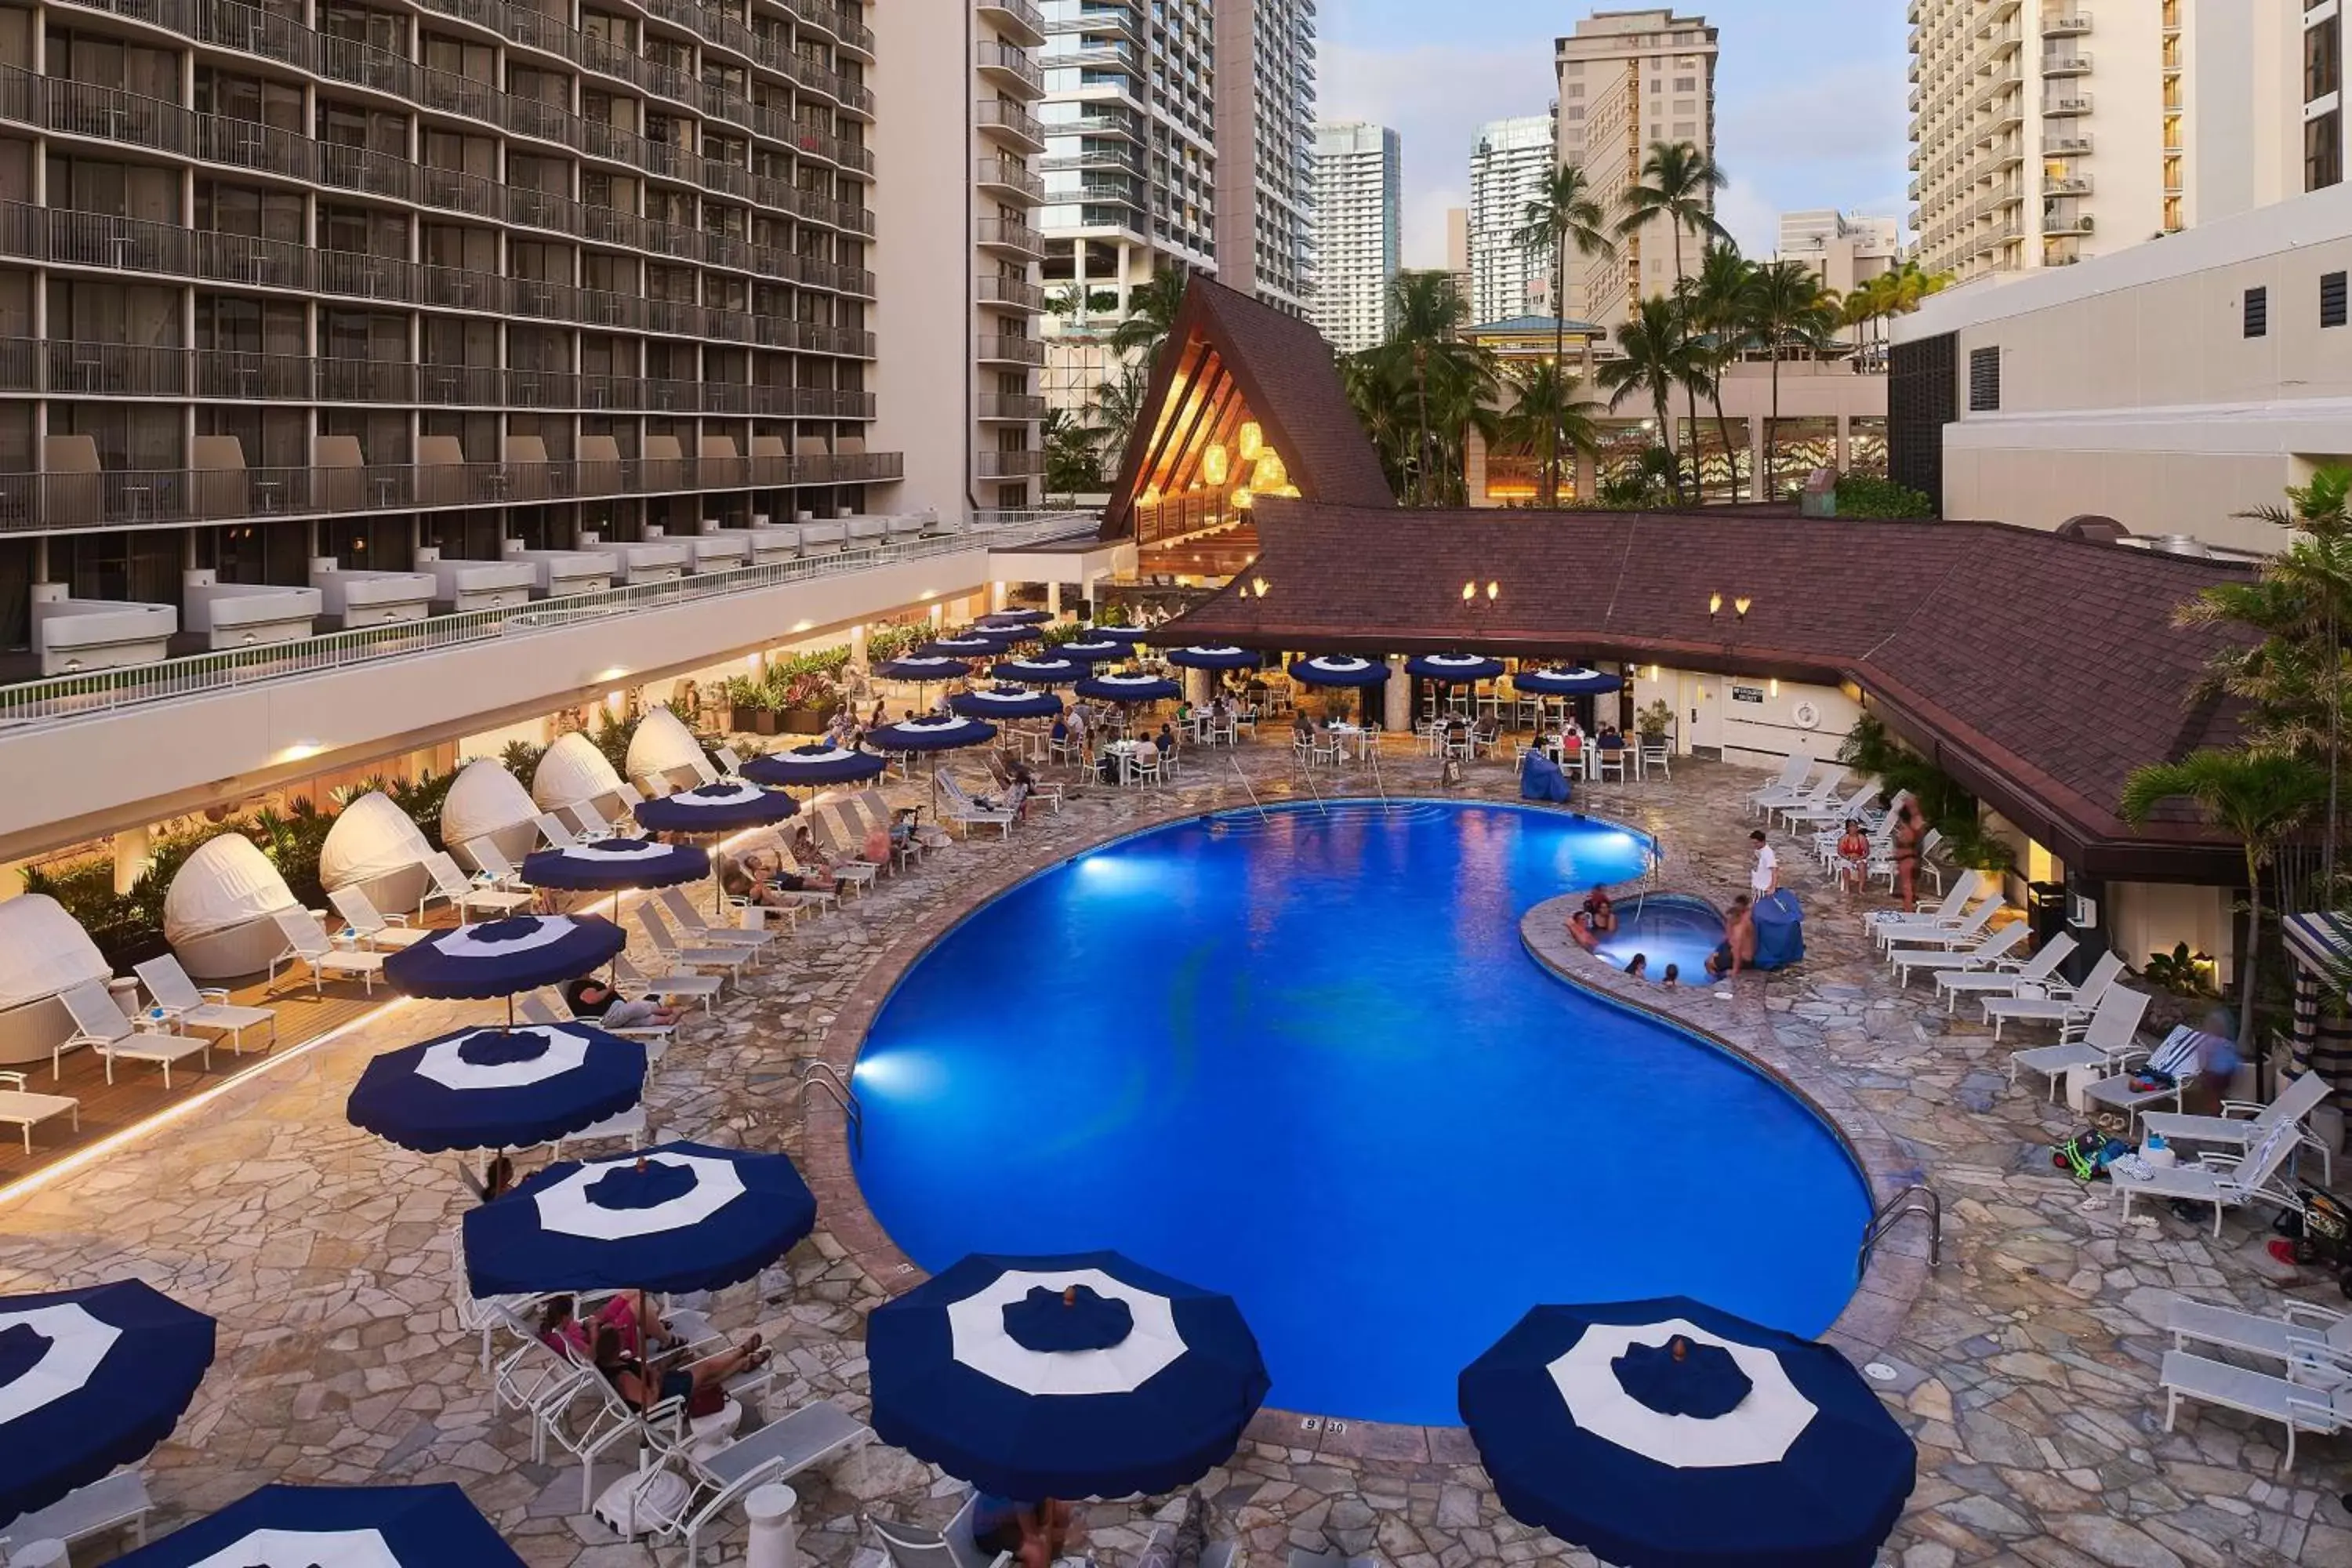 Property building, Pool View in OUTRIGGER Reef Waikiki Beach Resort